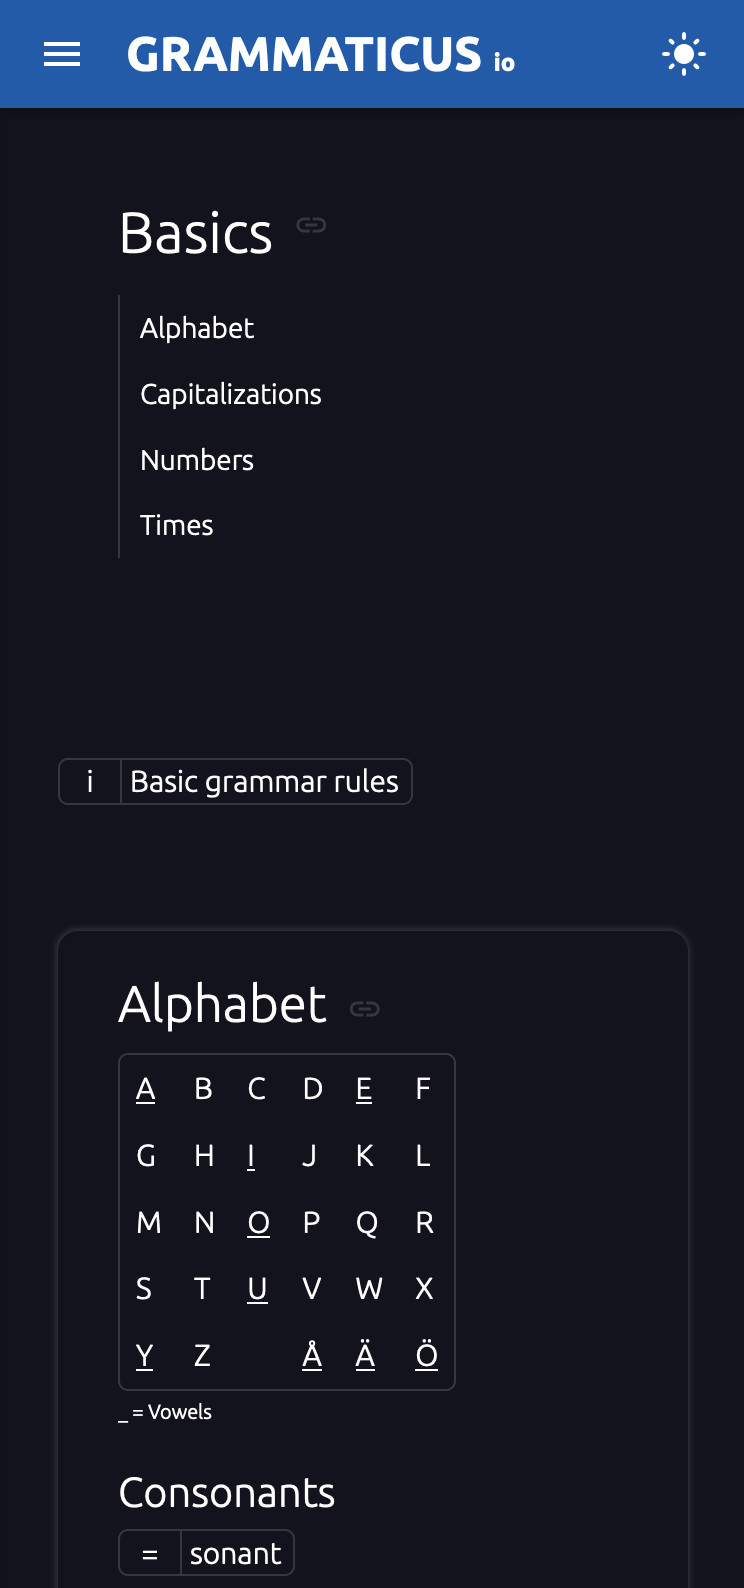 grammaticus.io - The mobile view with dark mode enabled